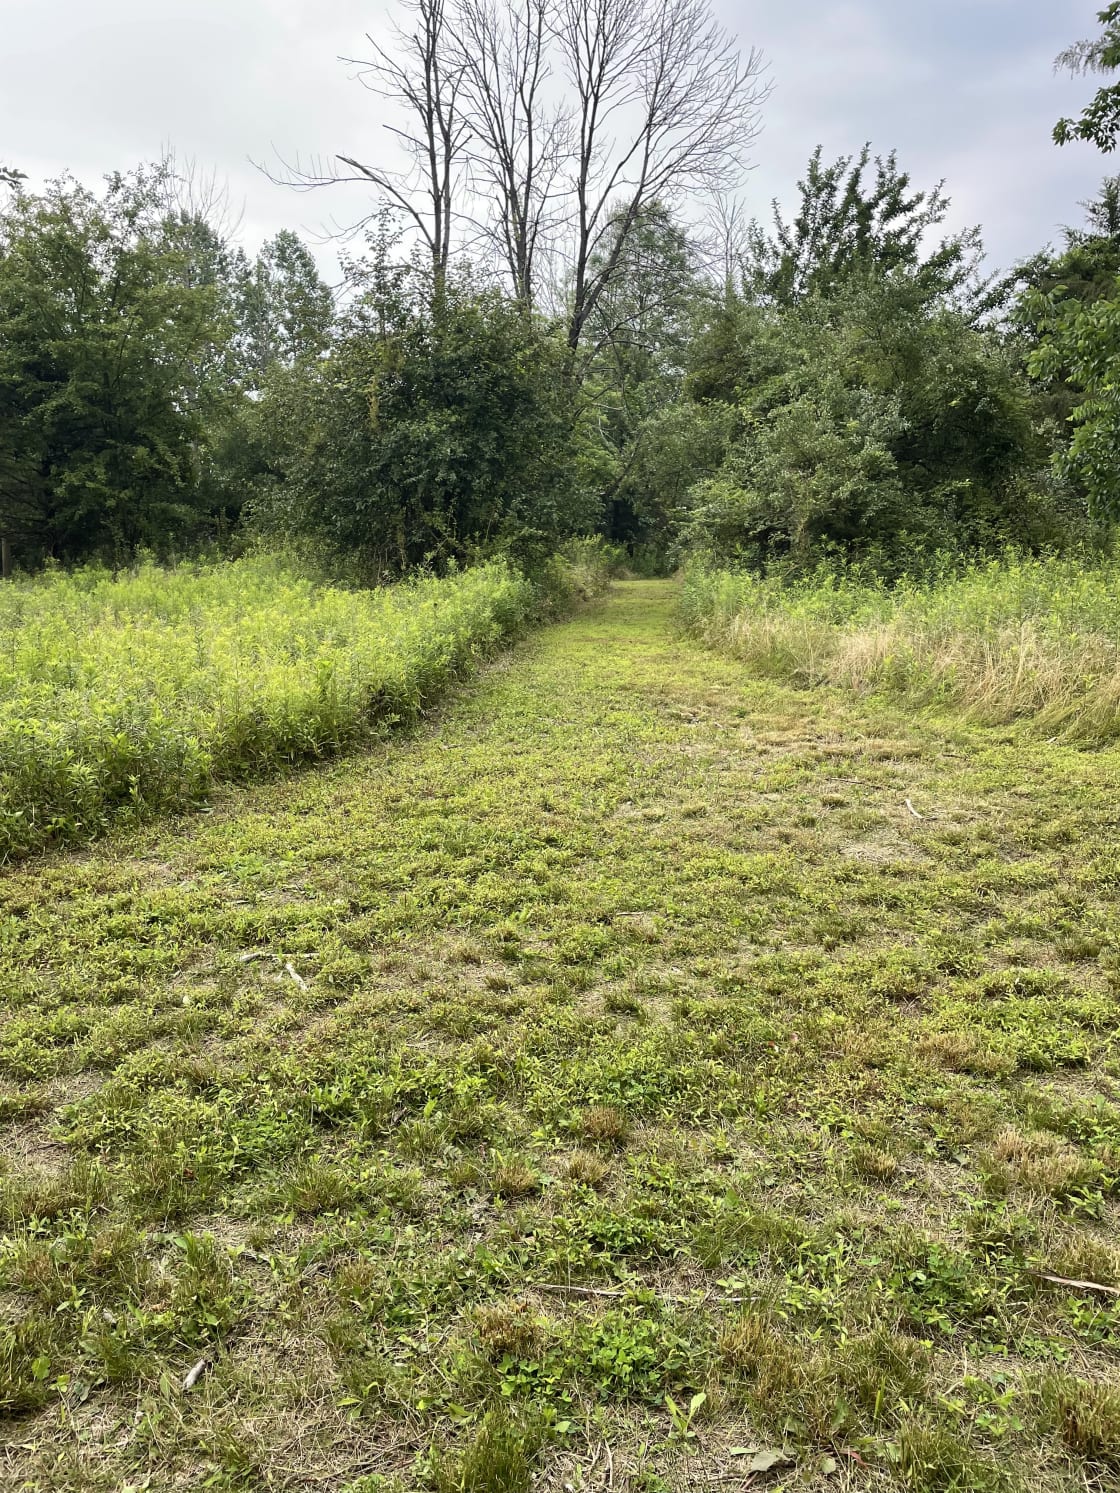 Our property has miles of mowed trails! All mapped out, each trail has its own name and when you arrive, we give you a map so you won’t get lost!